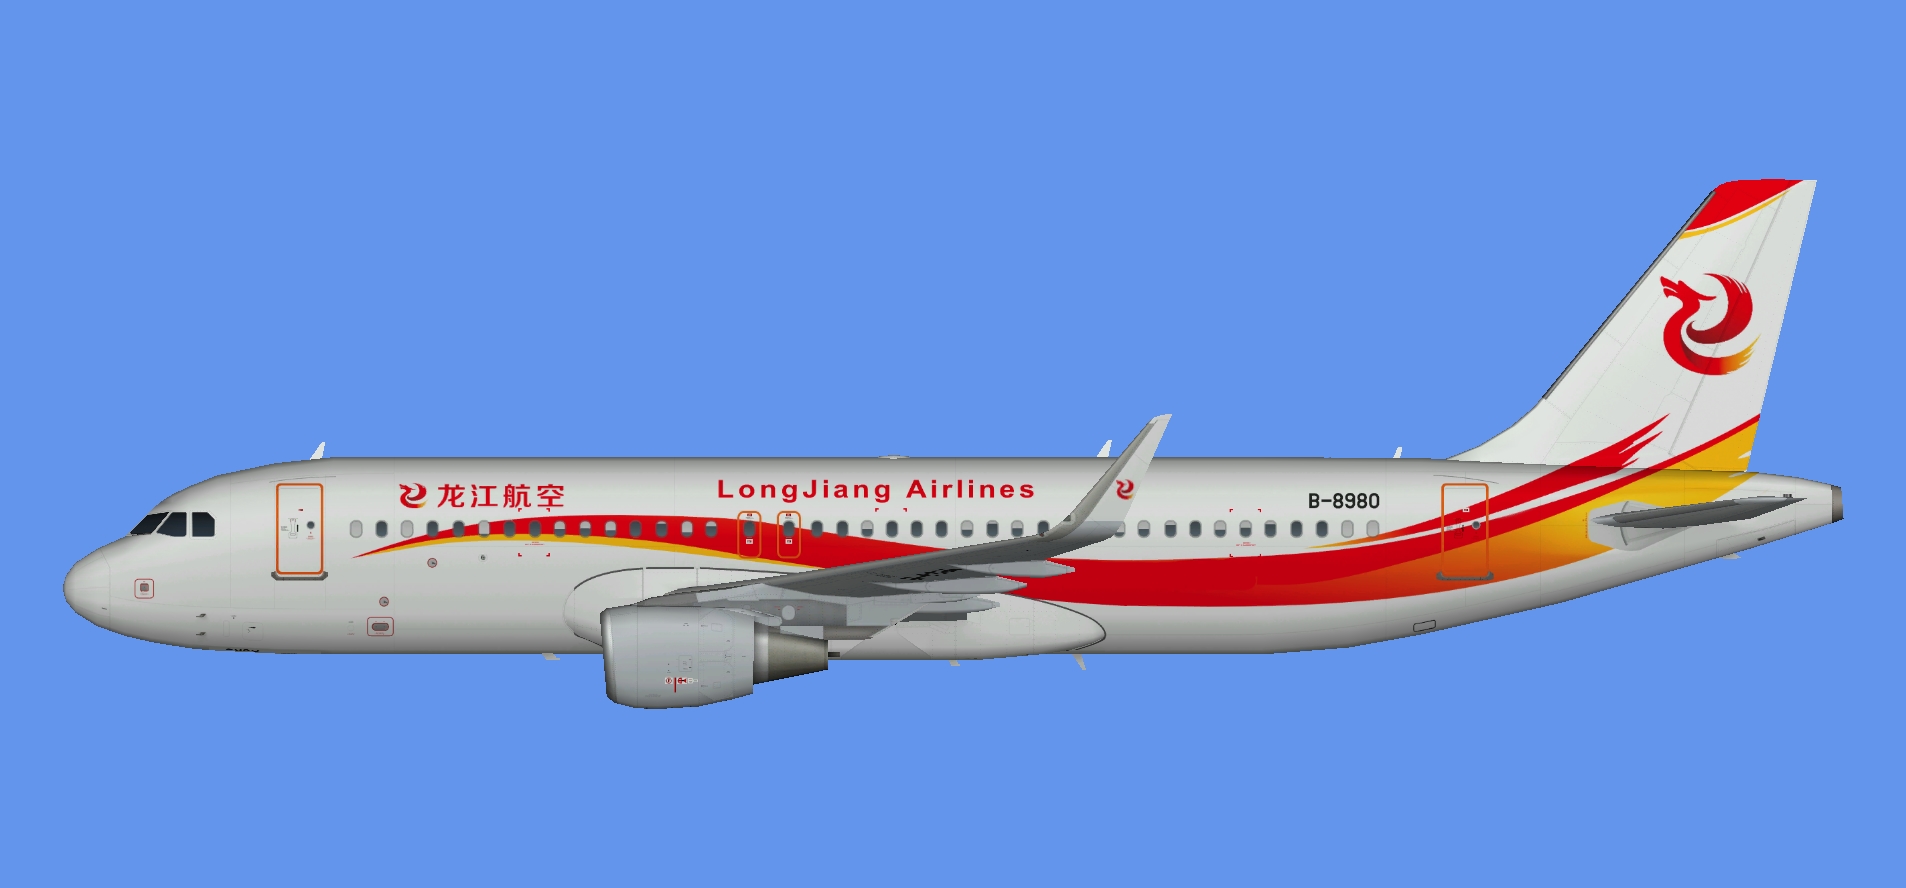 Longjiang Airlines Airbus A320